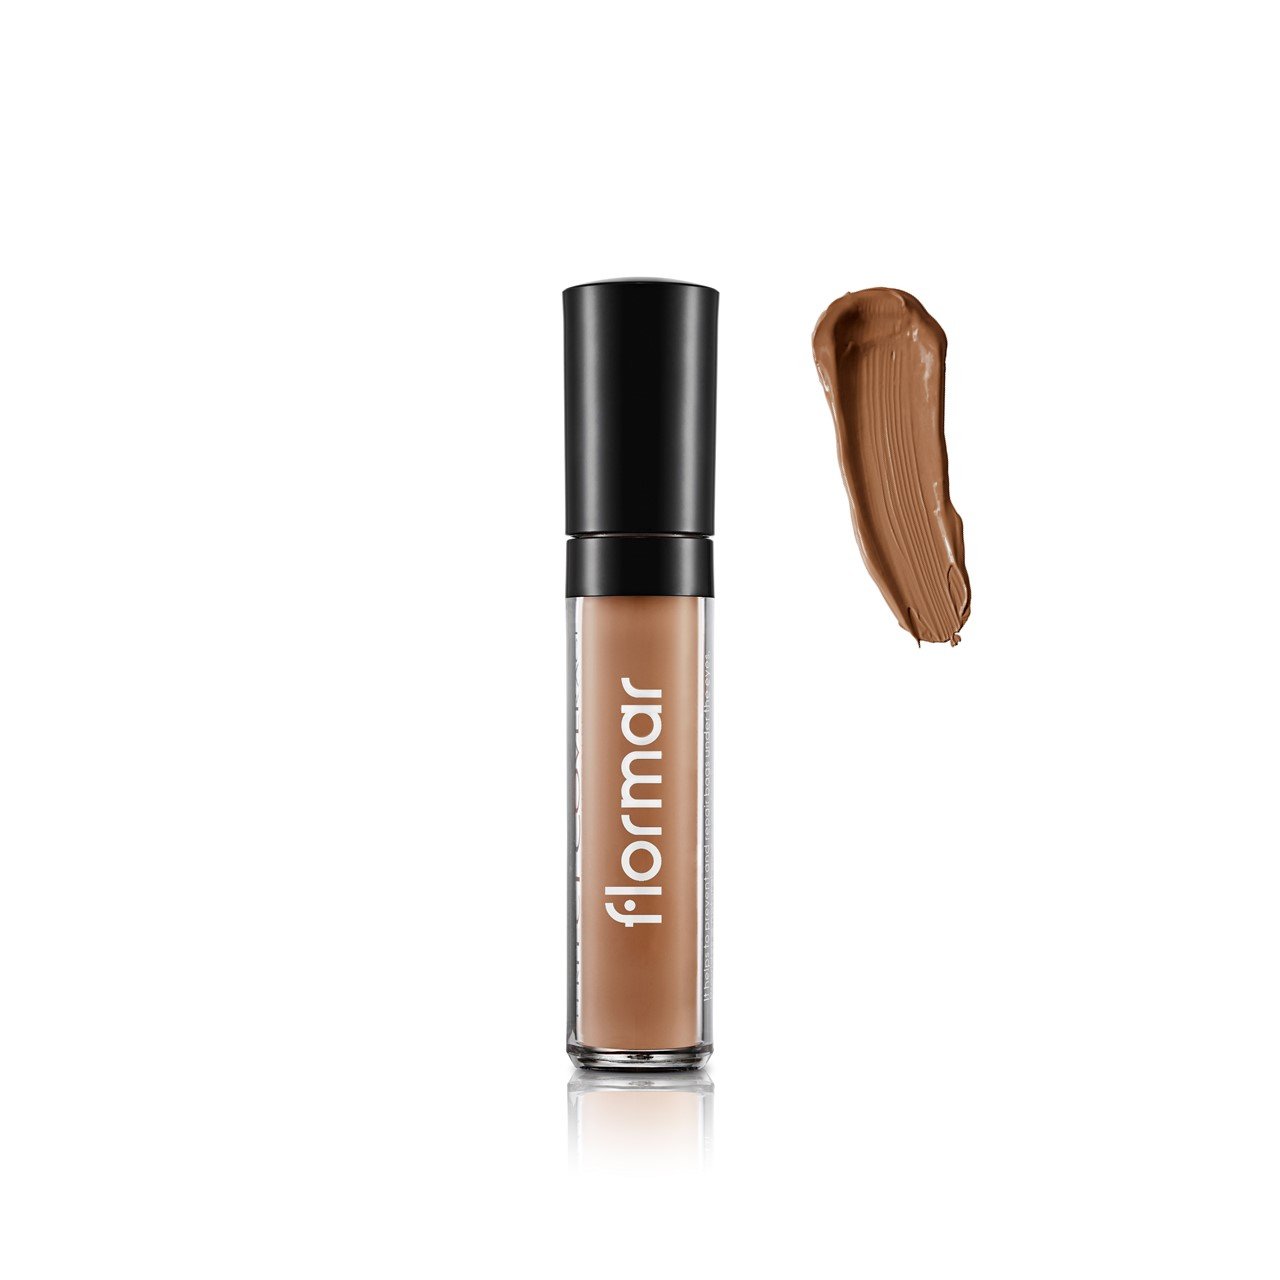 Flormar Perfect Coverage Liquid Eye Concealer - 020 Fair Light: Buy Online  at Best Price in Egypt - Souq is now